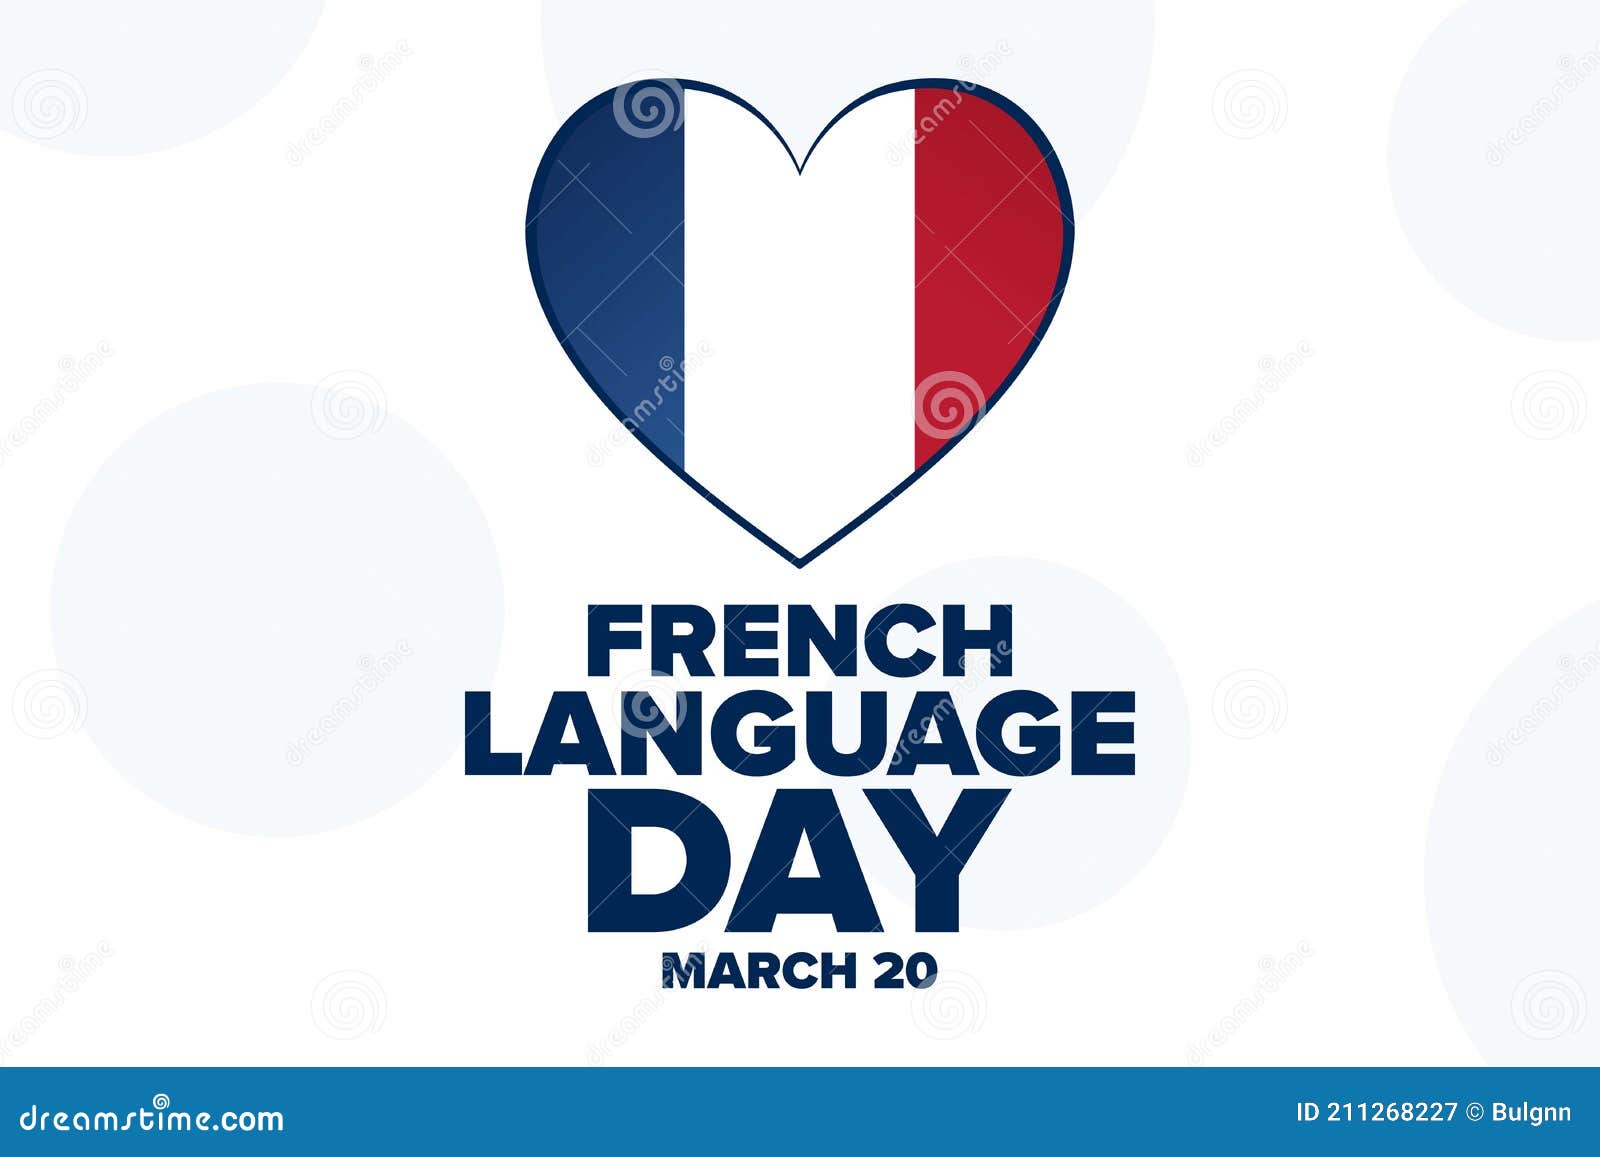 FRENCH LANGUAGE DAY – March 20 | National Day Calendar